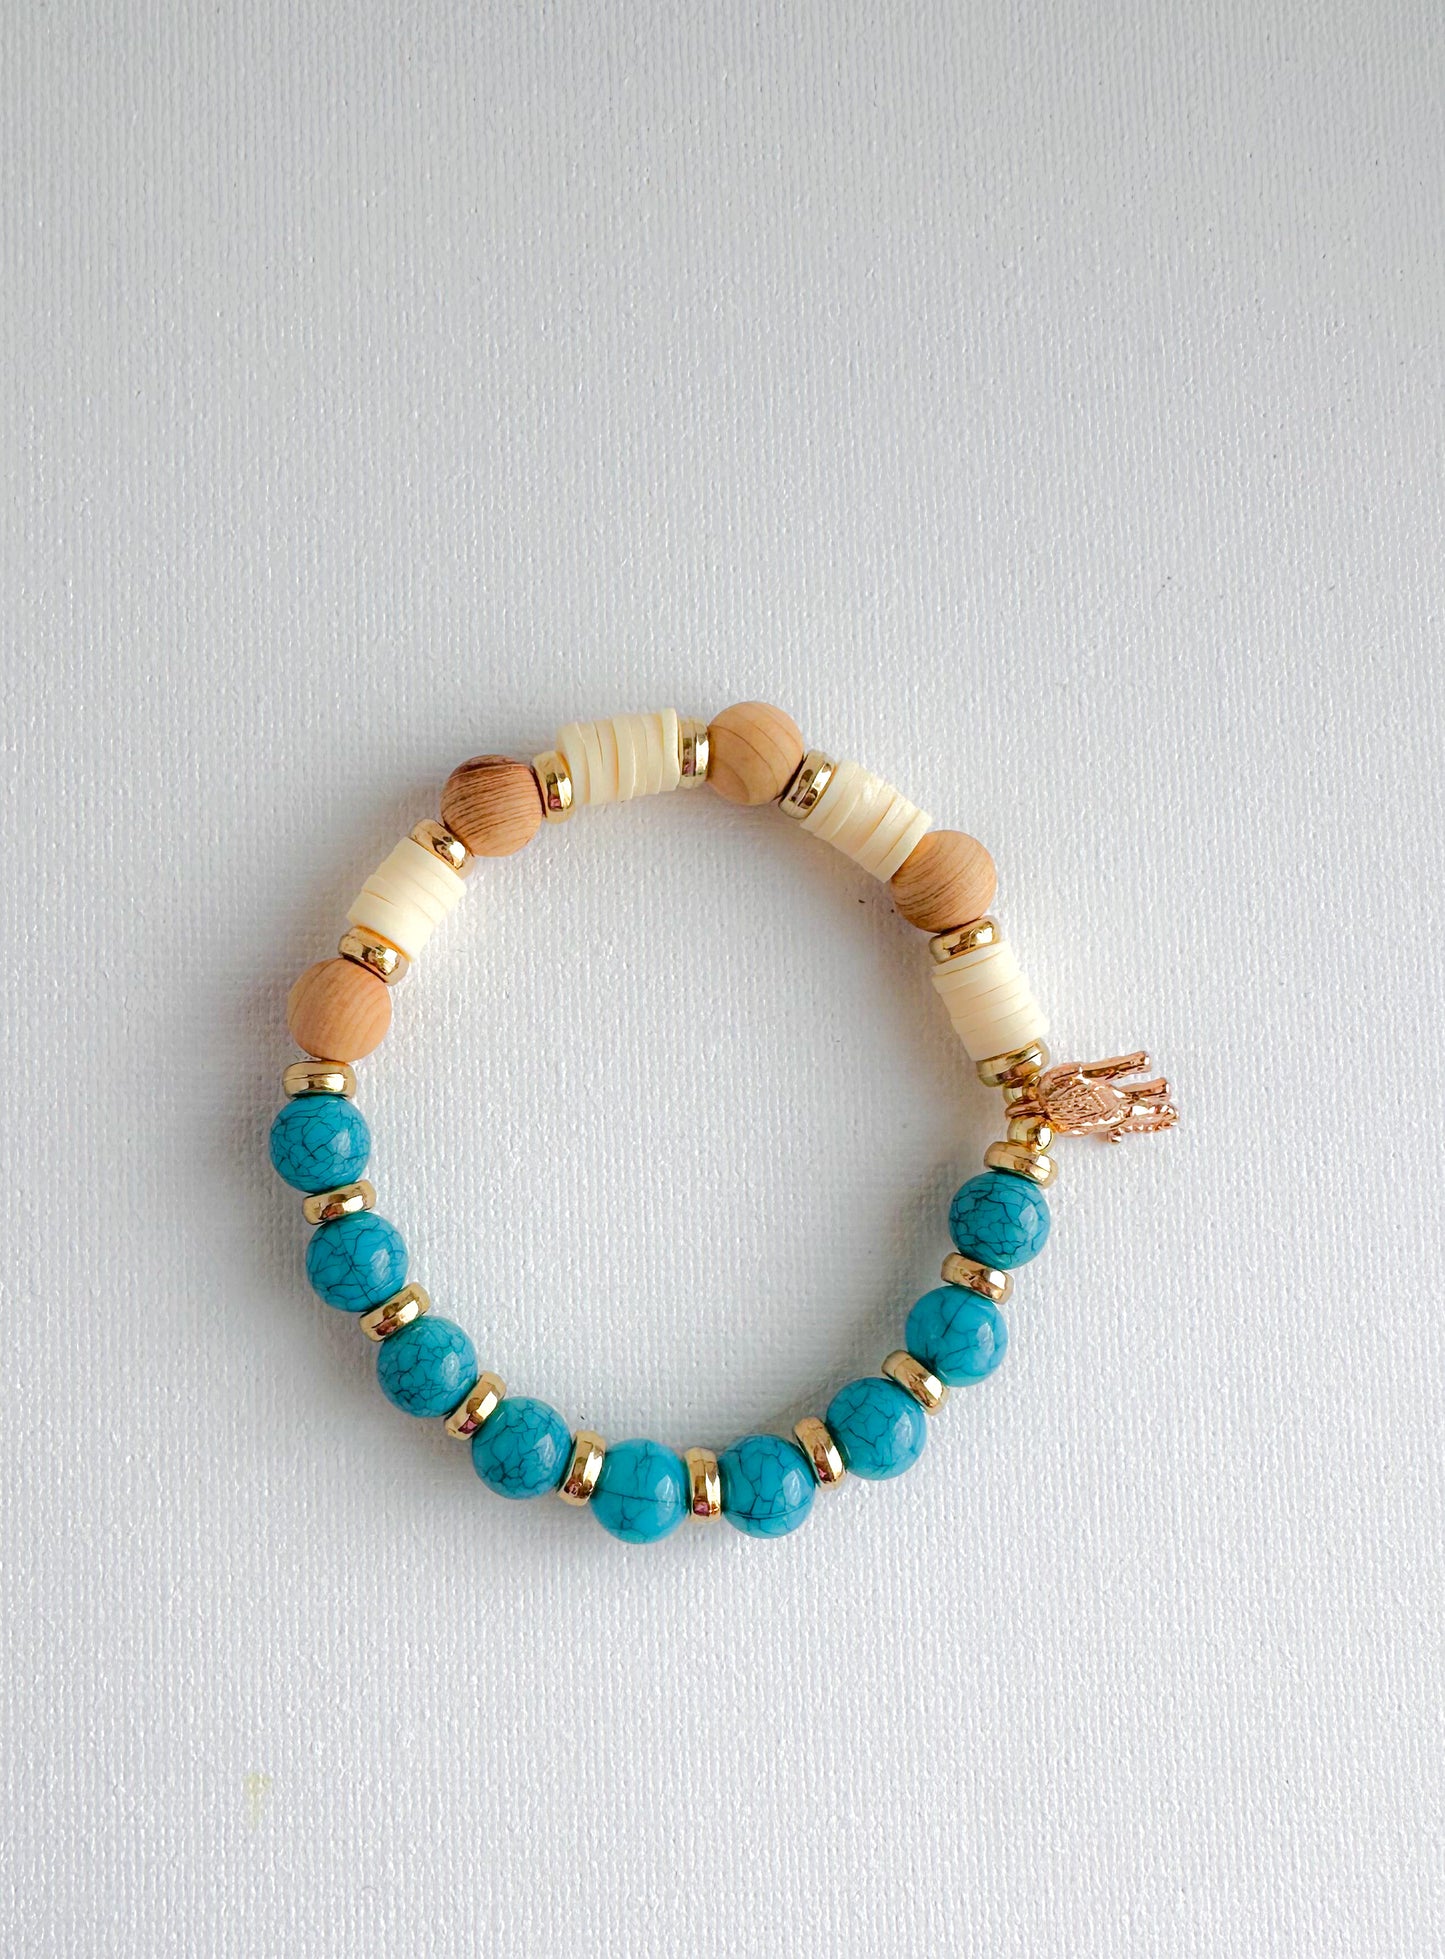 Turquoise and wood Stretch Bracelet